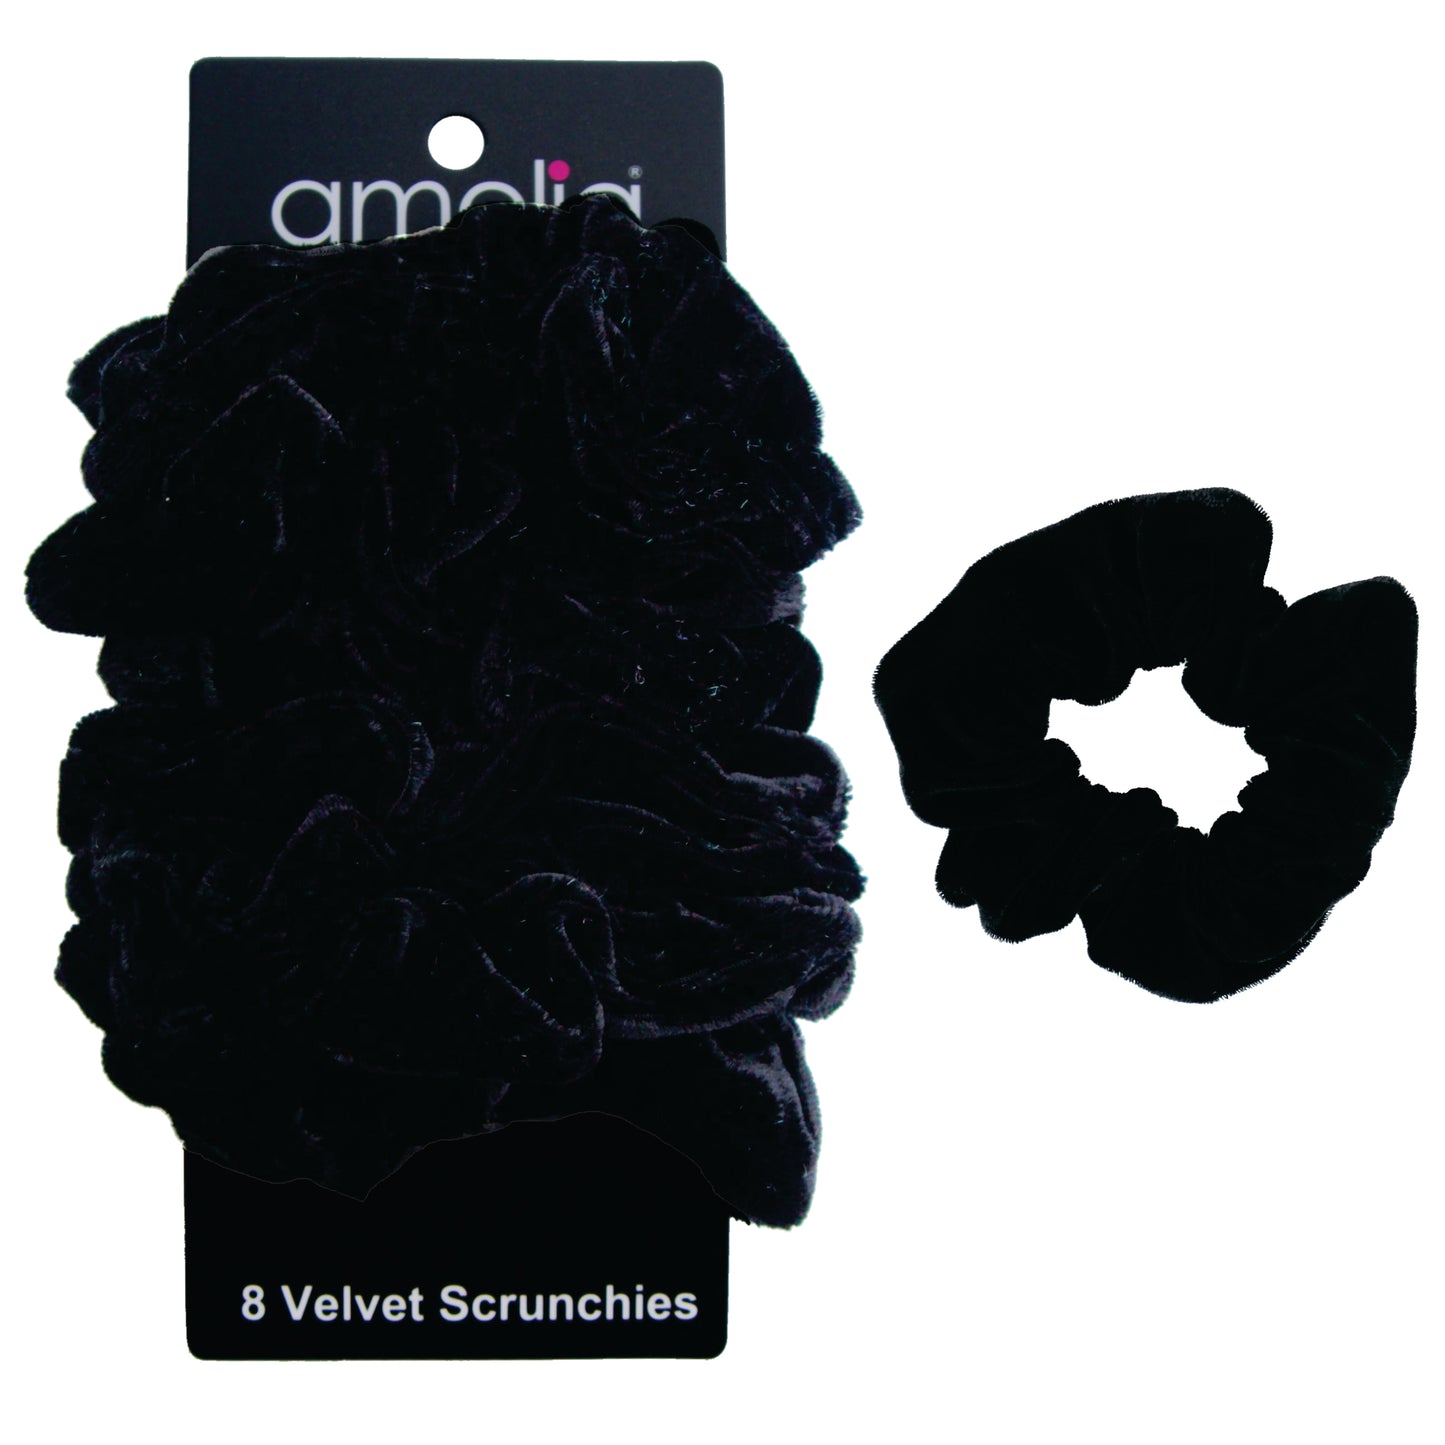 Amelia Beauty, Black Velvet Scrunchies, 3.5in Diameter, Gentle on Hair, Strong Hold, No Snag, No Dents or Creases. 8 Pack